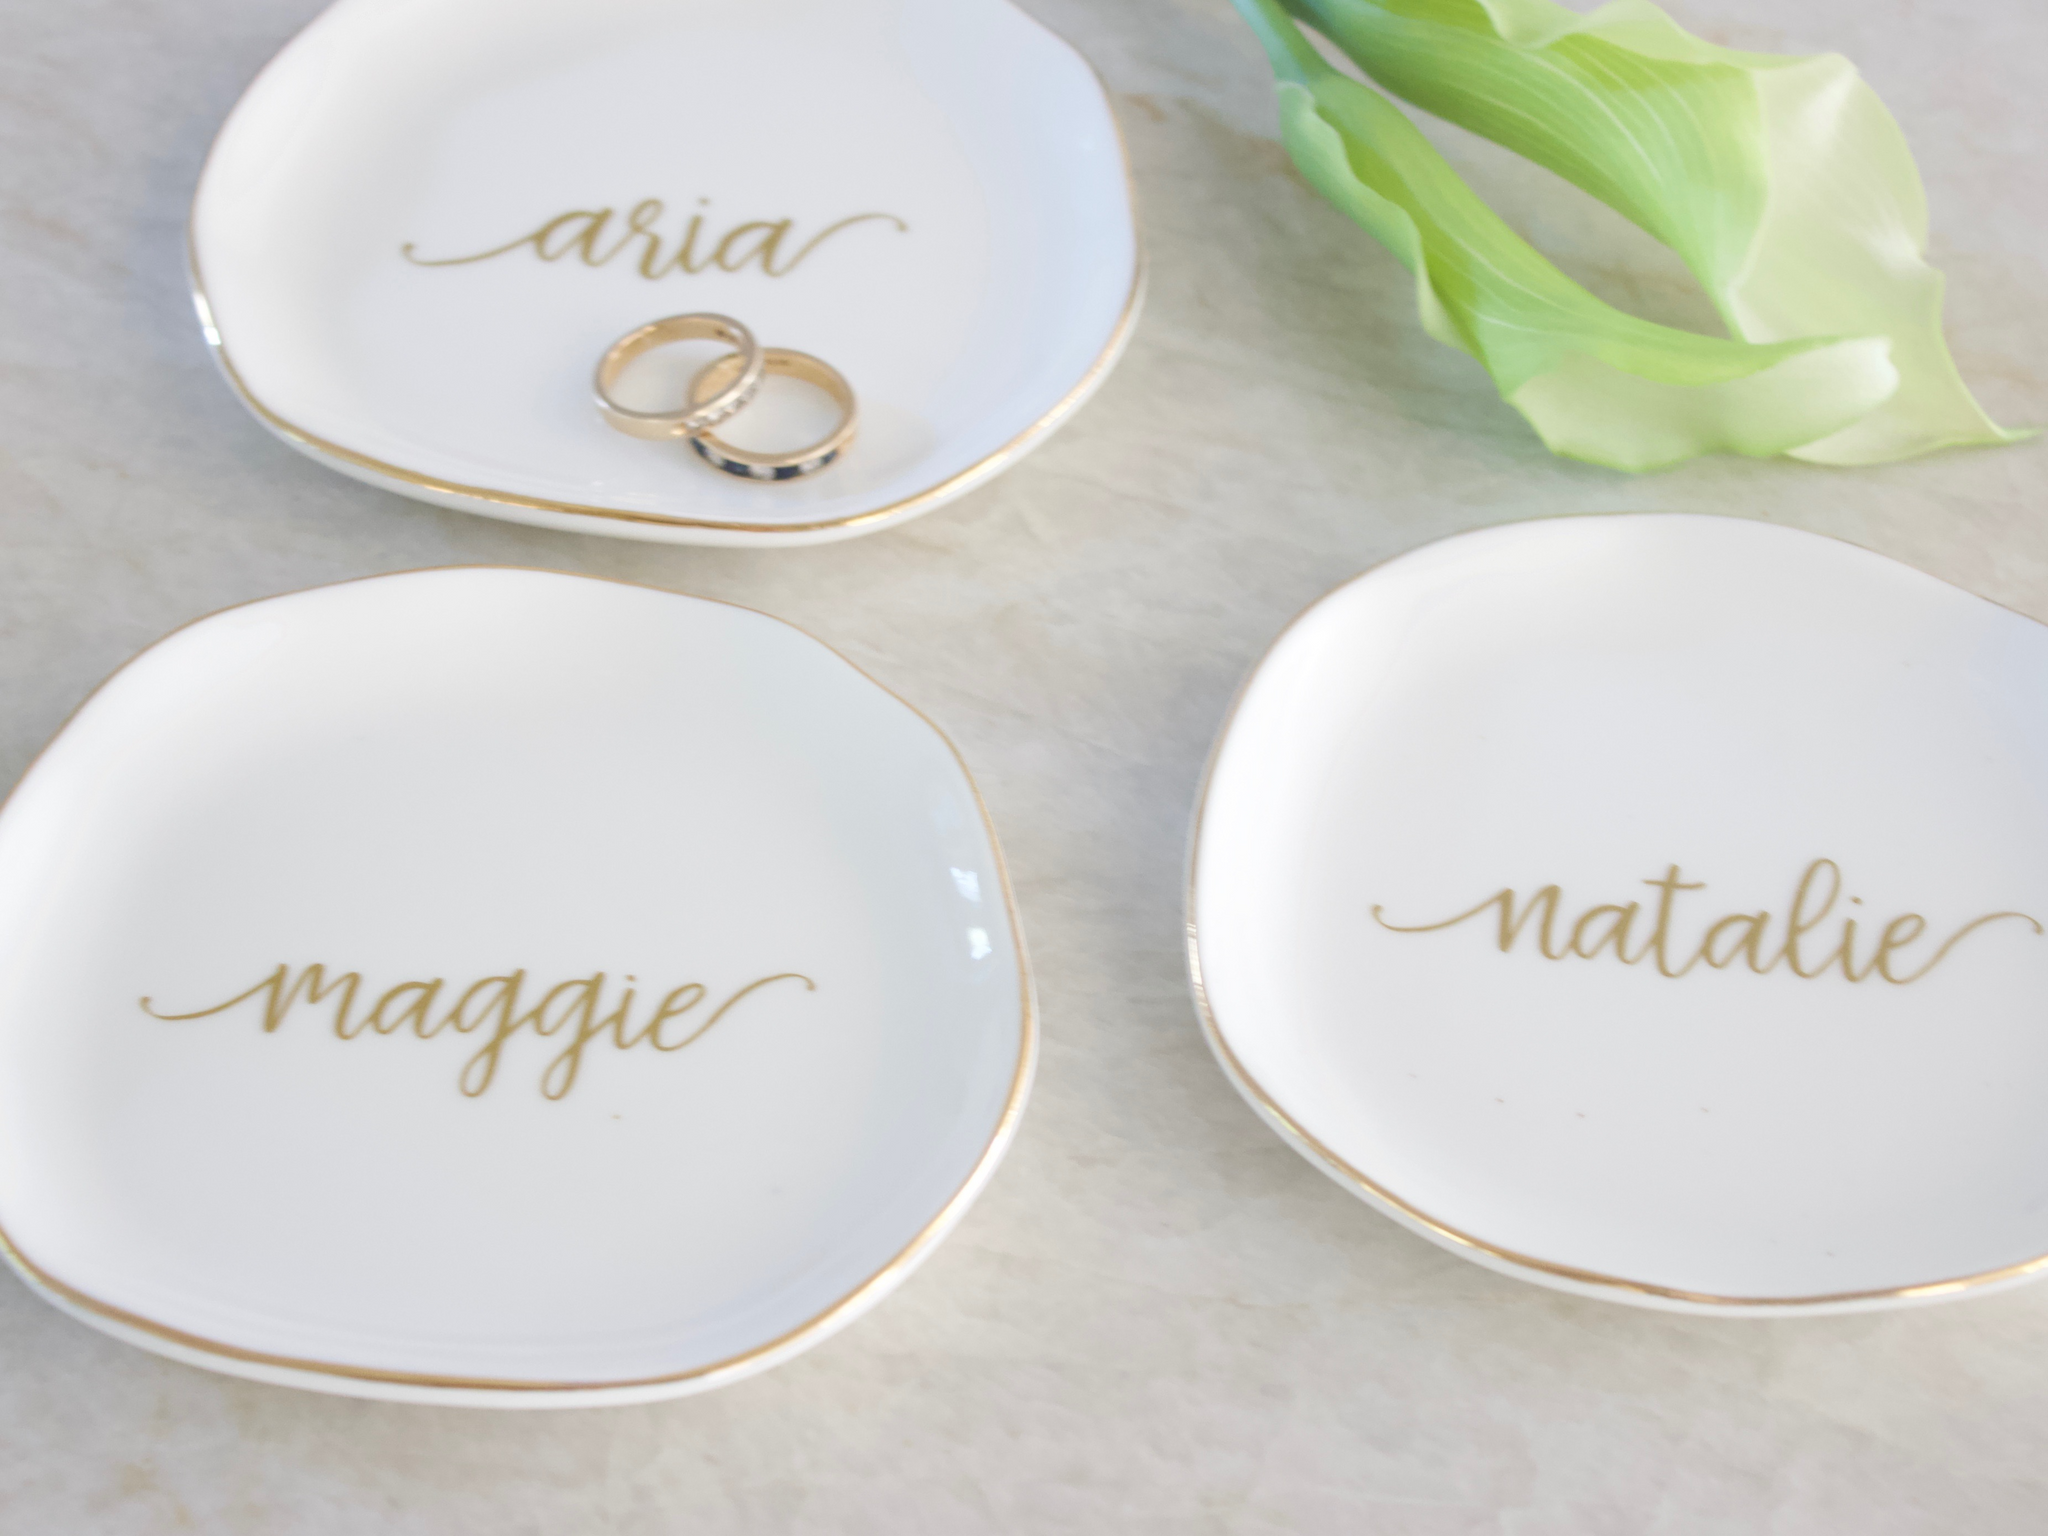 Personalized Plate with Gold Trim - Customizable Photo Products